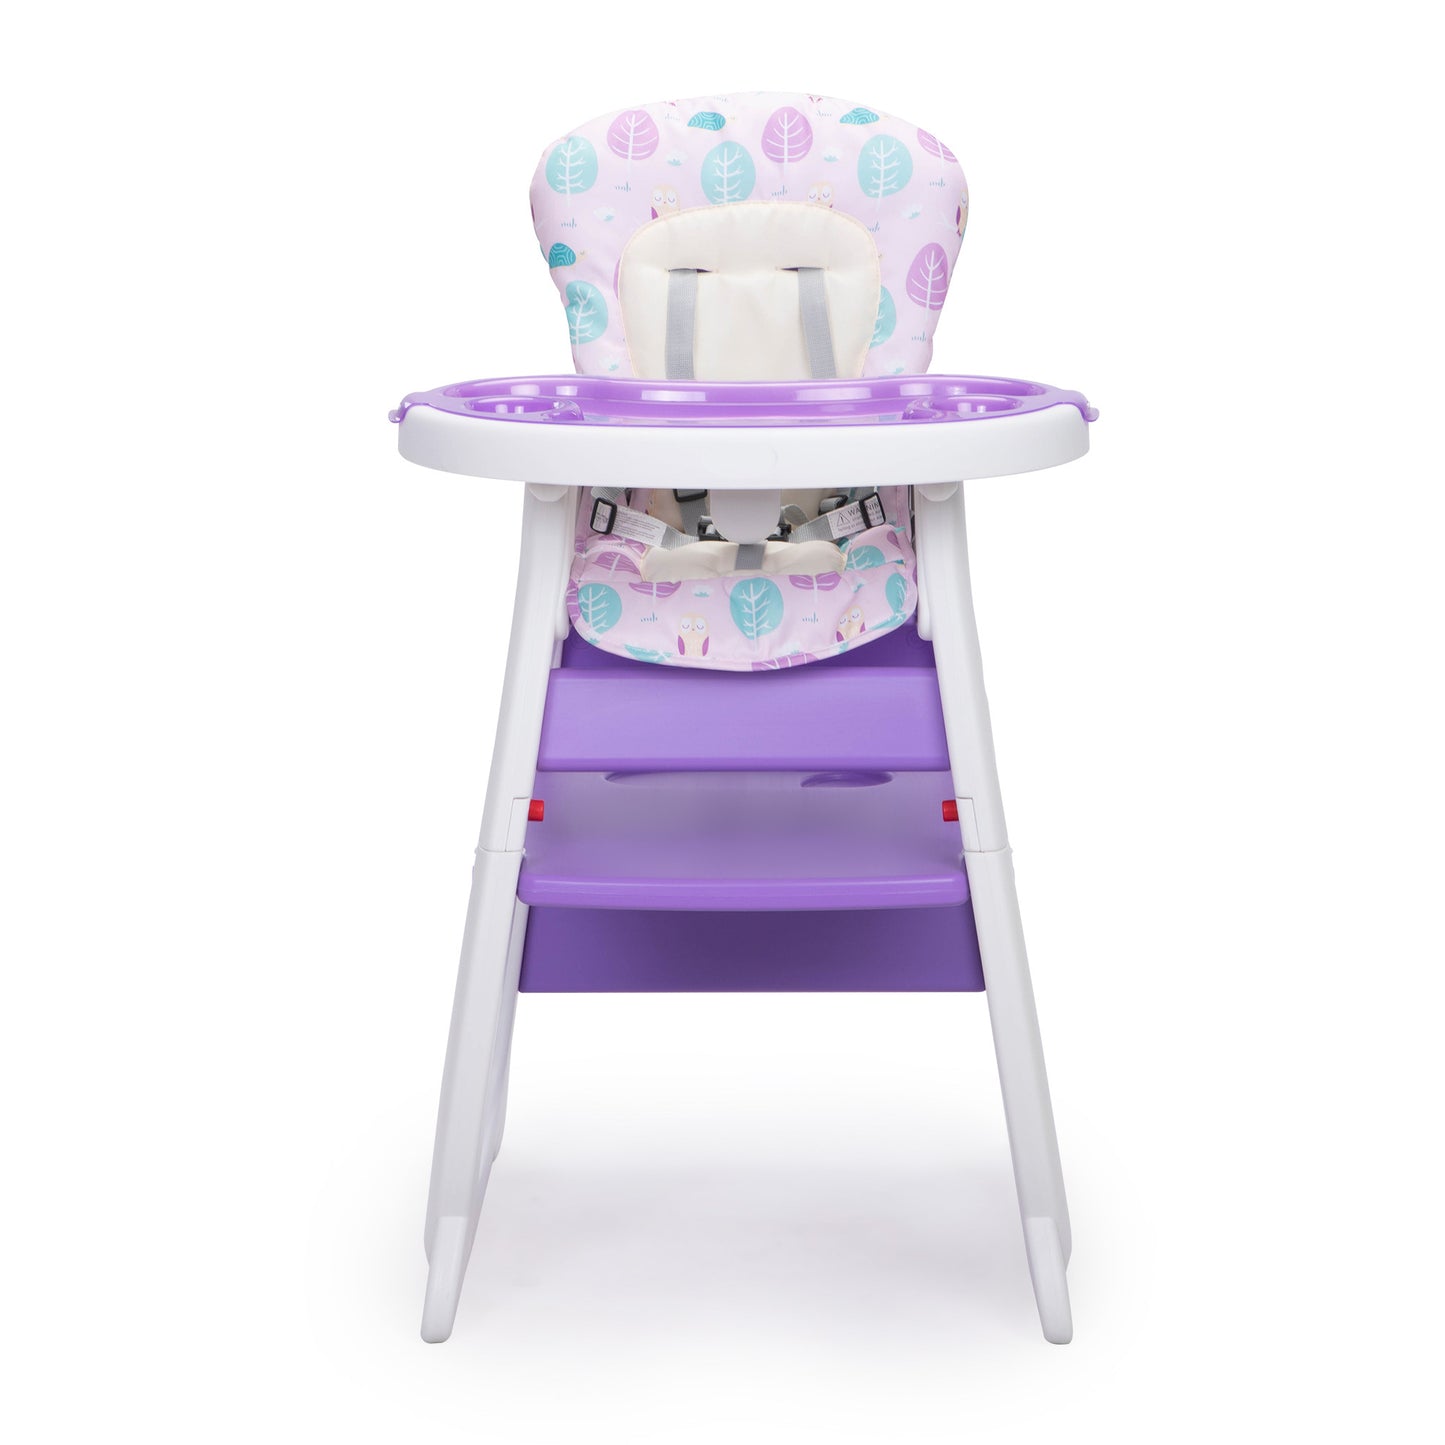 Multipurpose Adjustable Highchair,Children's dining chair for Baby Toddler Dinning Table with Feeding Tray and 5-Point Safety Buckle XH